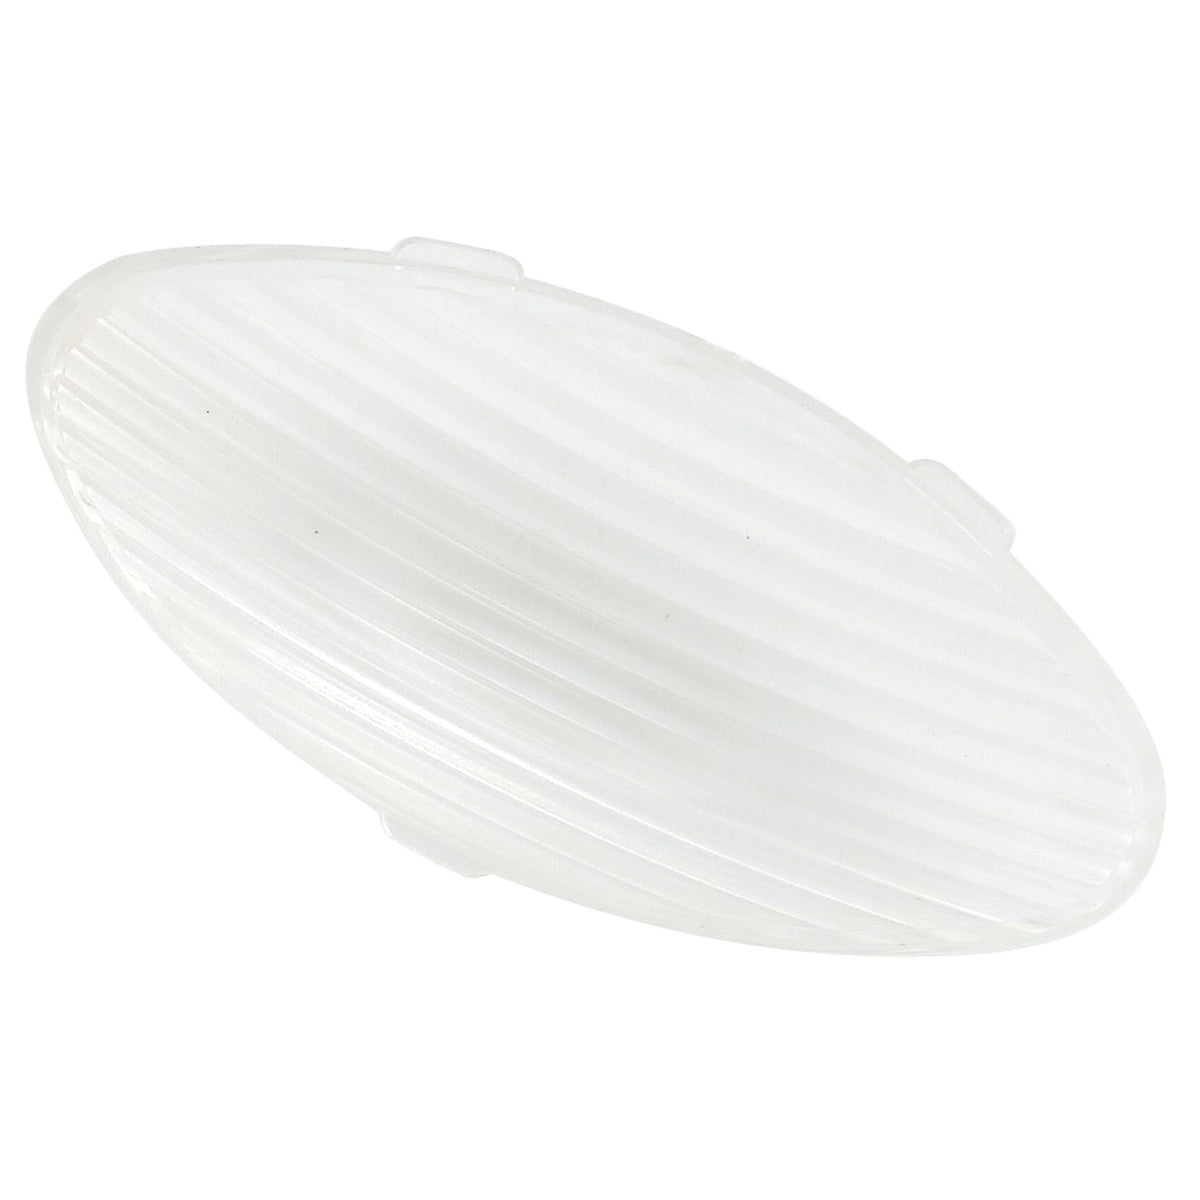 Ming's Mark Qualifies for Free Shipping Ming's Mark LongLife Replacement Lens for Oval LED Porch Light #9090125